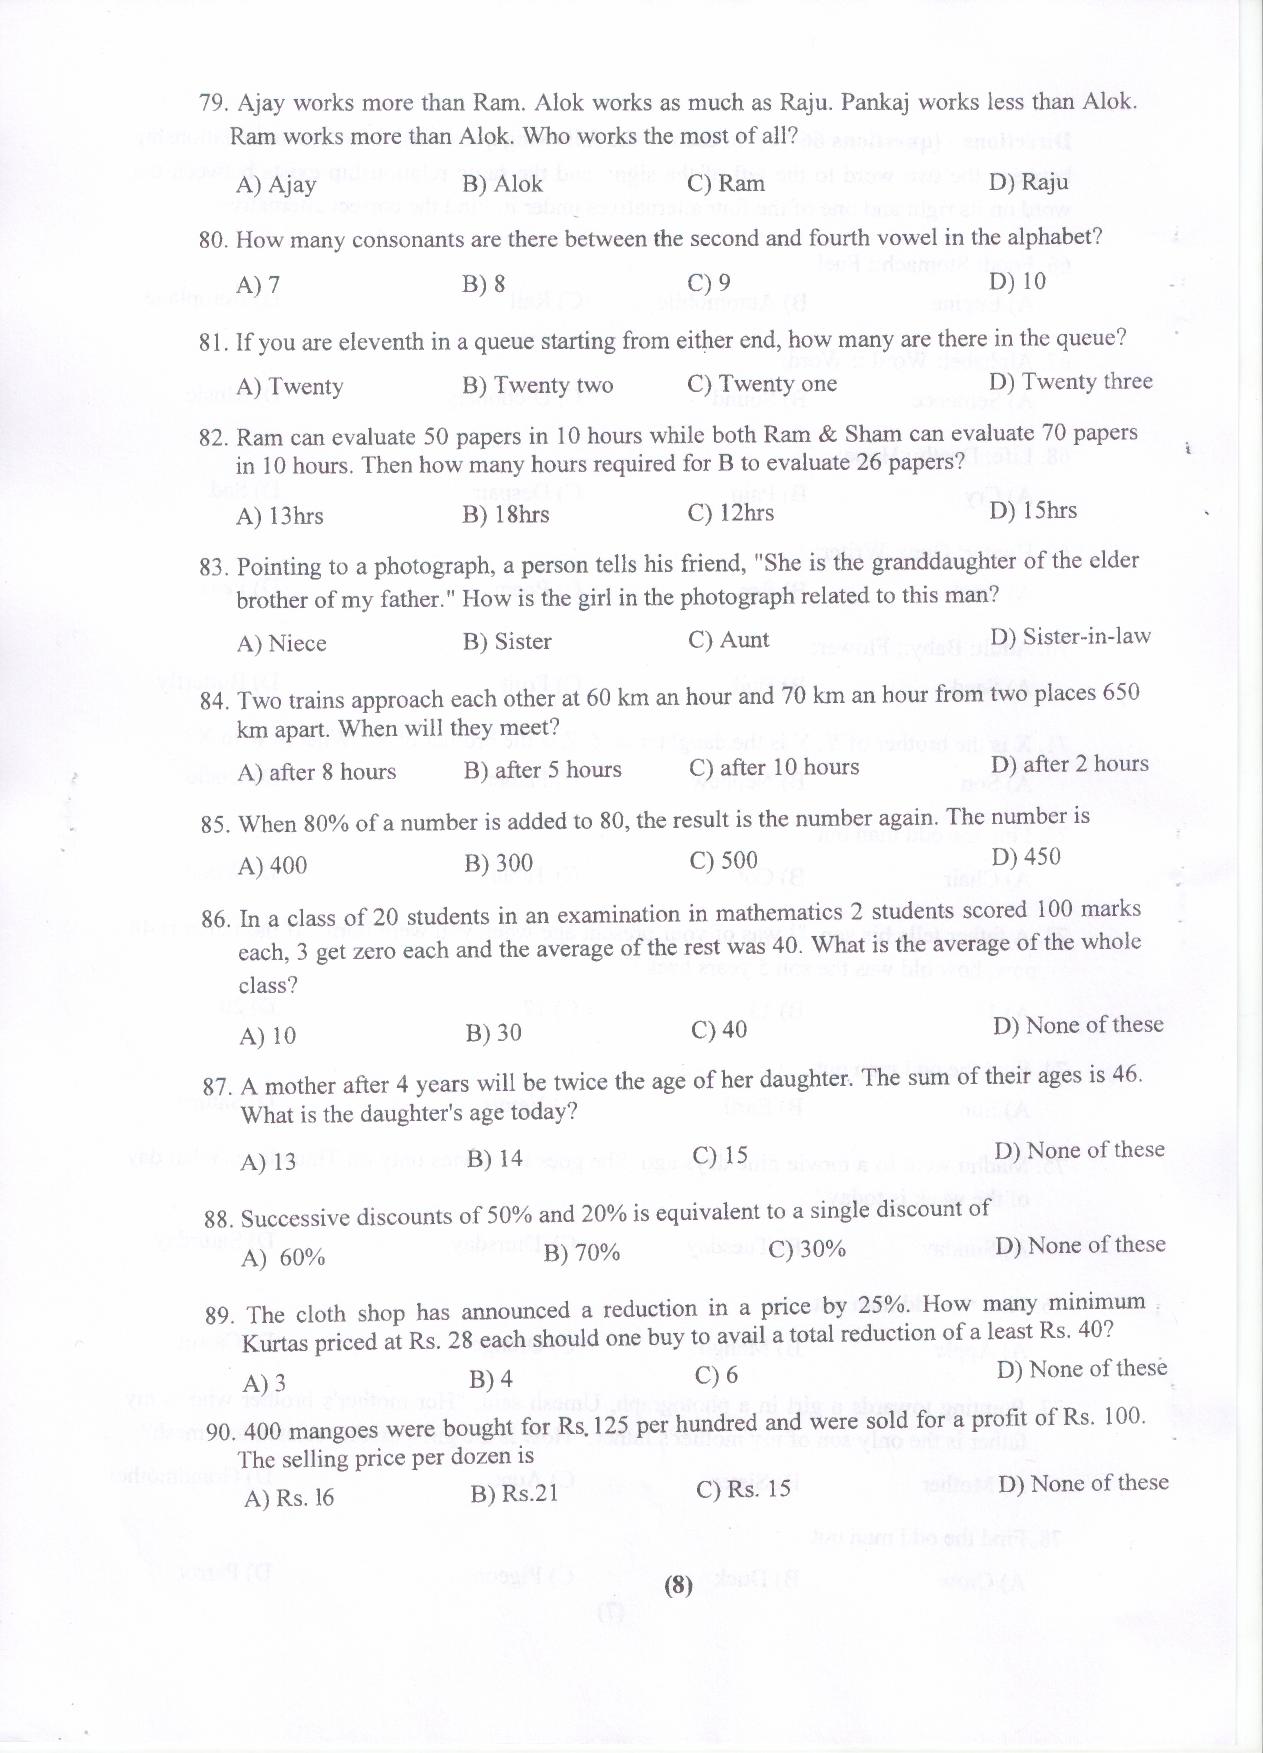 PU MET 2015 Question Booklet with Key - Page 9